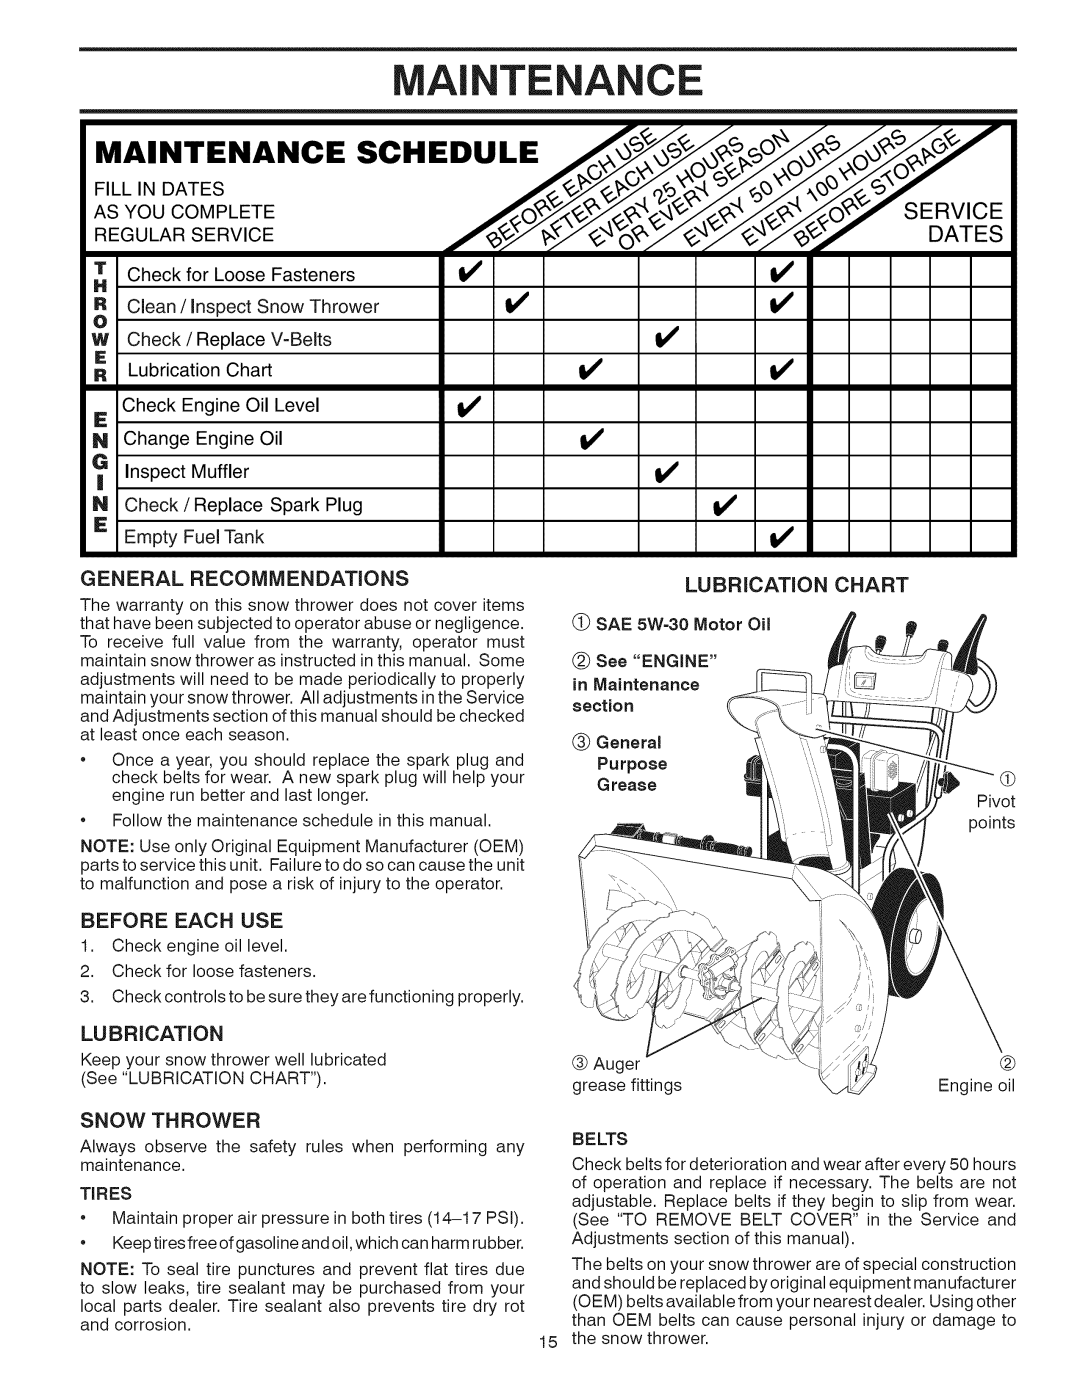 Sears 944.528117 owner manual General Recommendations, Before Each USE, Snow Thrower, Tires 